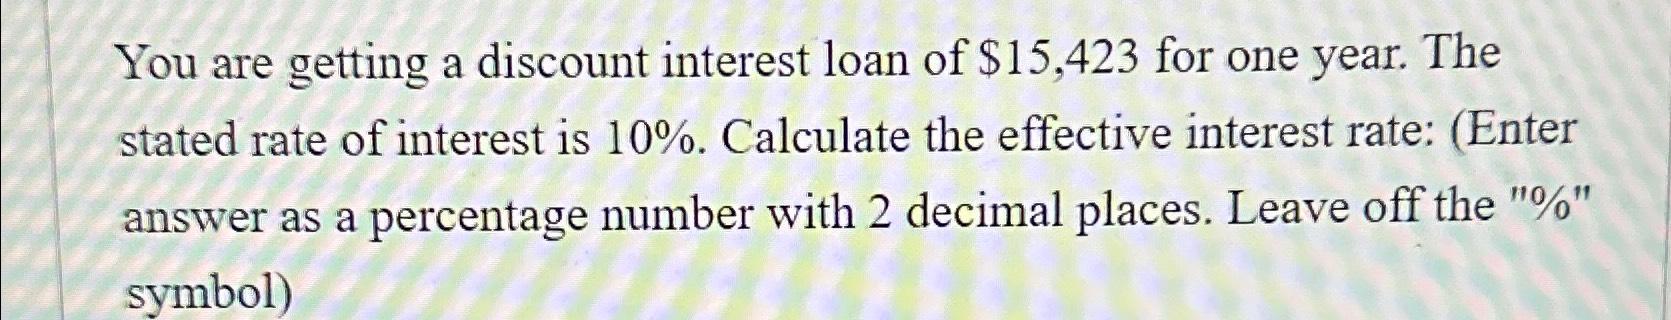 You are getting a discount interest loan of $15,423 for one year. The stated rate of interest is 10%.